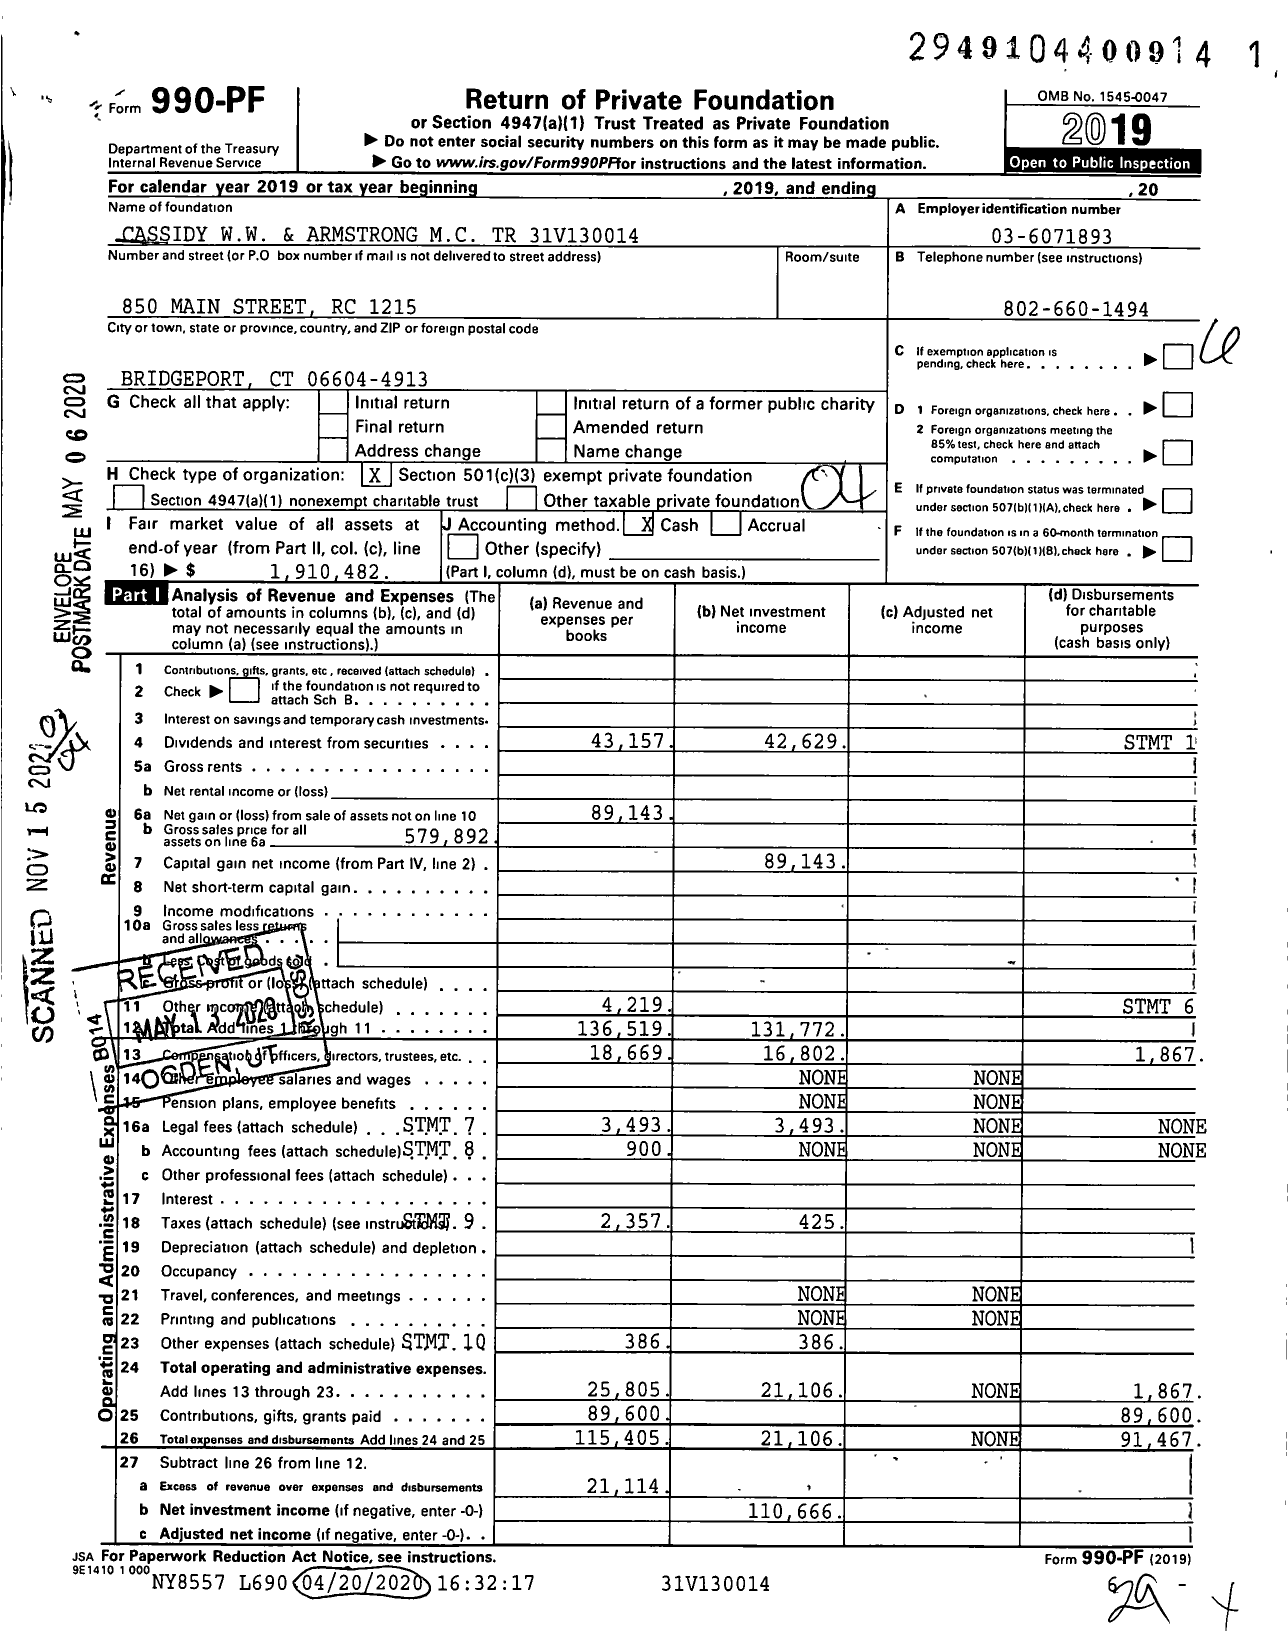 Image of first page of 2019 Form 990PF for Cassidy WW and Armstrong MC Trust